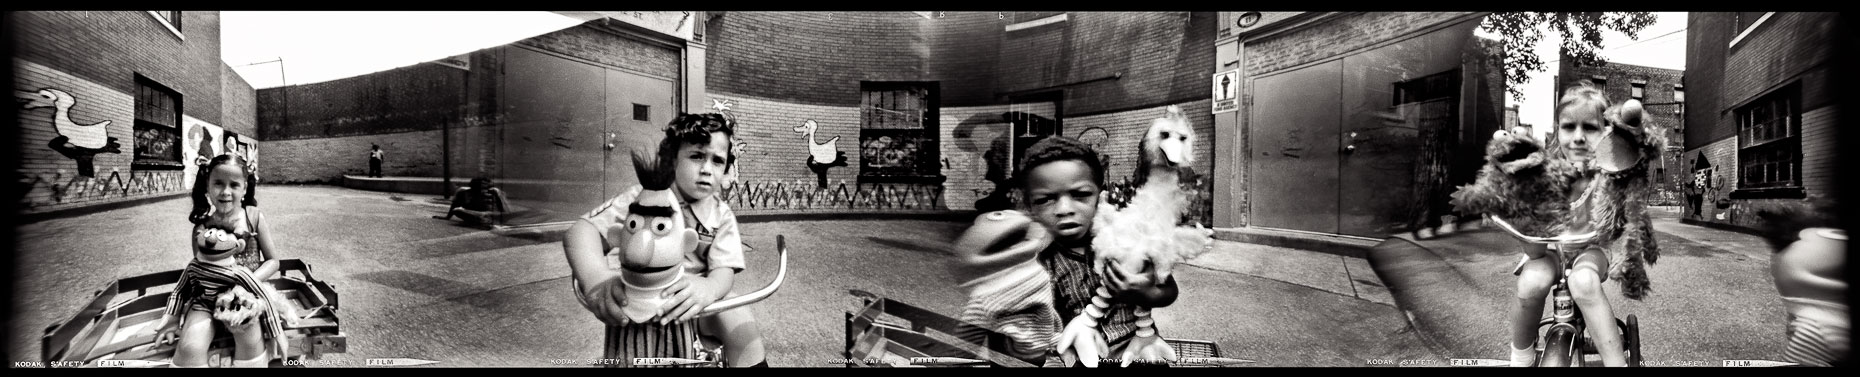 45_Puppets_Schoolyard_SouthPhilly_1973_bw